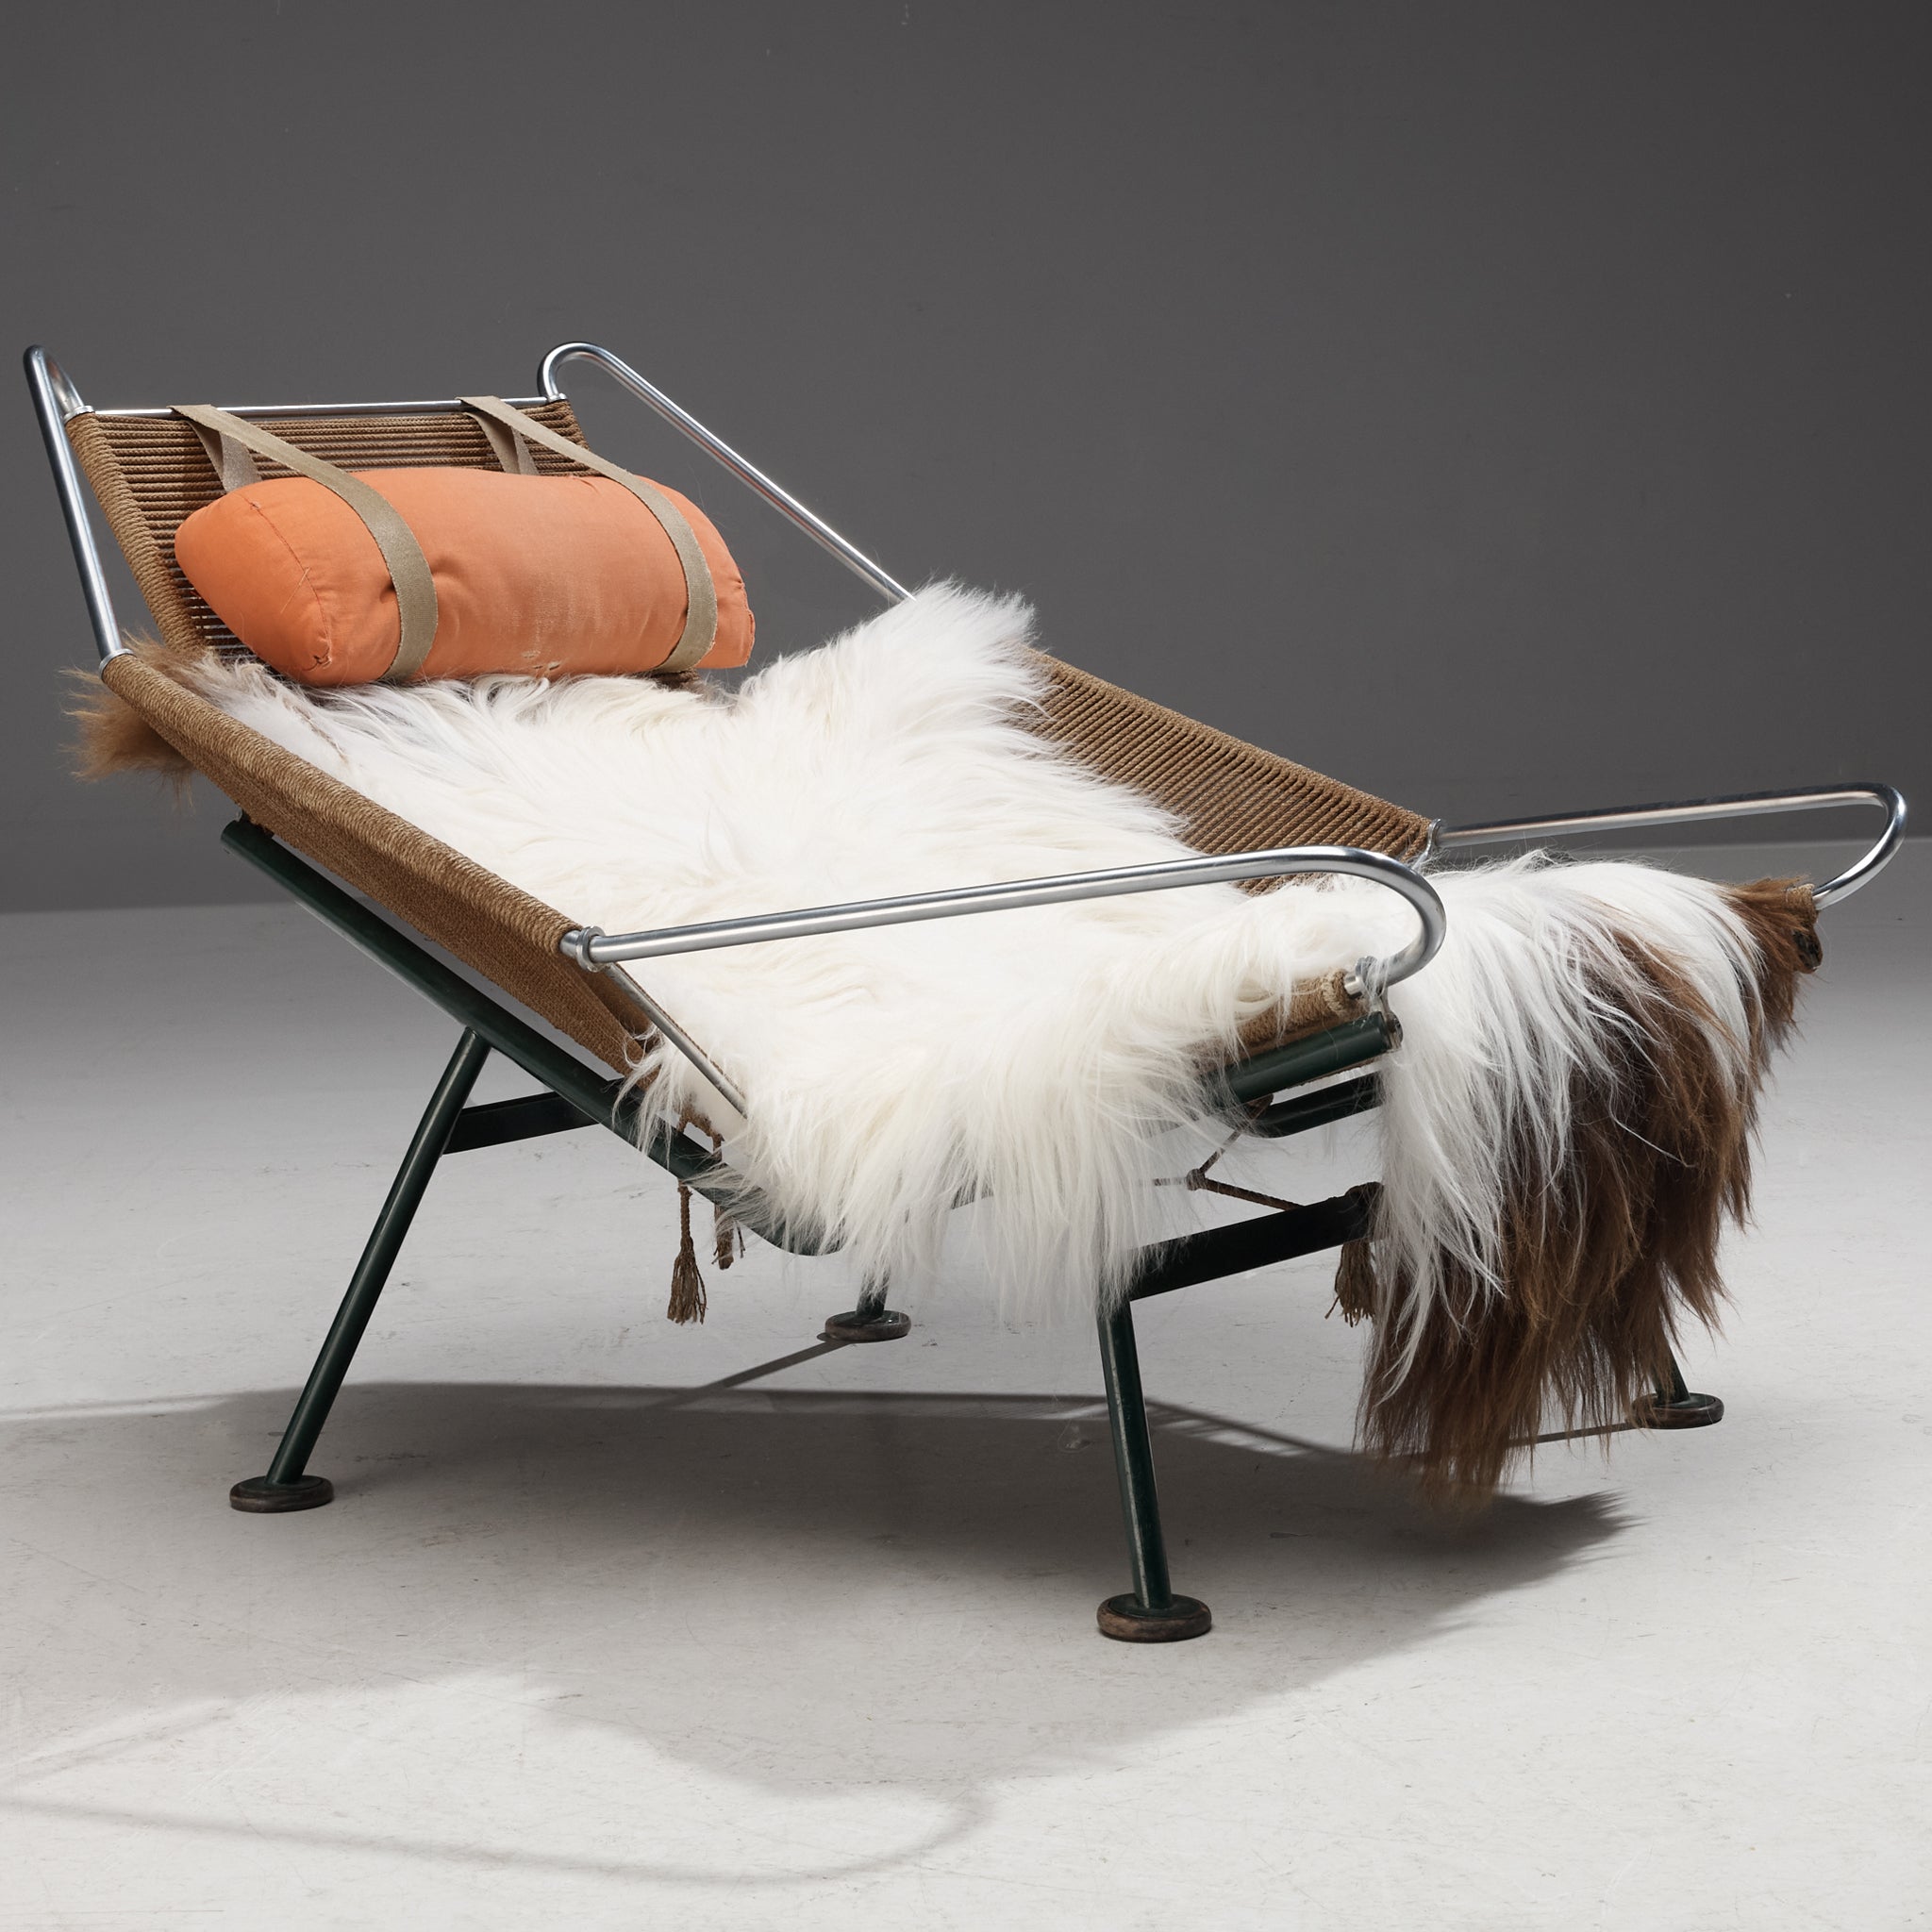 Hans Wegner, ‘Flag Halyard’ lounge chair model ‘GE225’, rope, dark green lacquered steel, fabric, wood, sheepskin, Denmark, 1950

This iconic chair, made with 250 meters of rope, is designed by the Danish designer Hans Wegner. The name ‘Flag